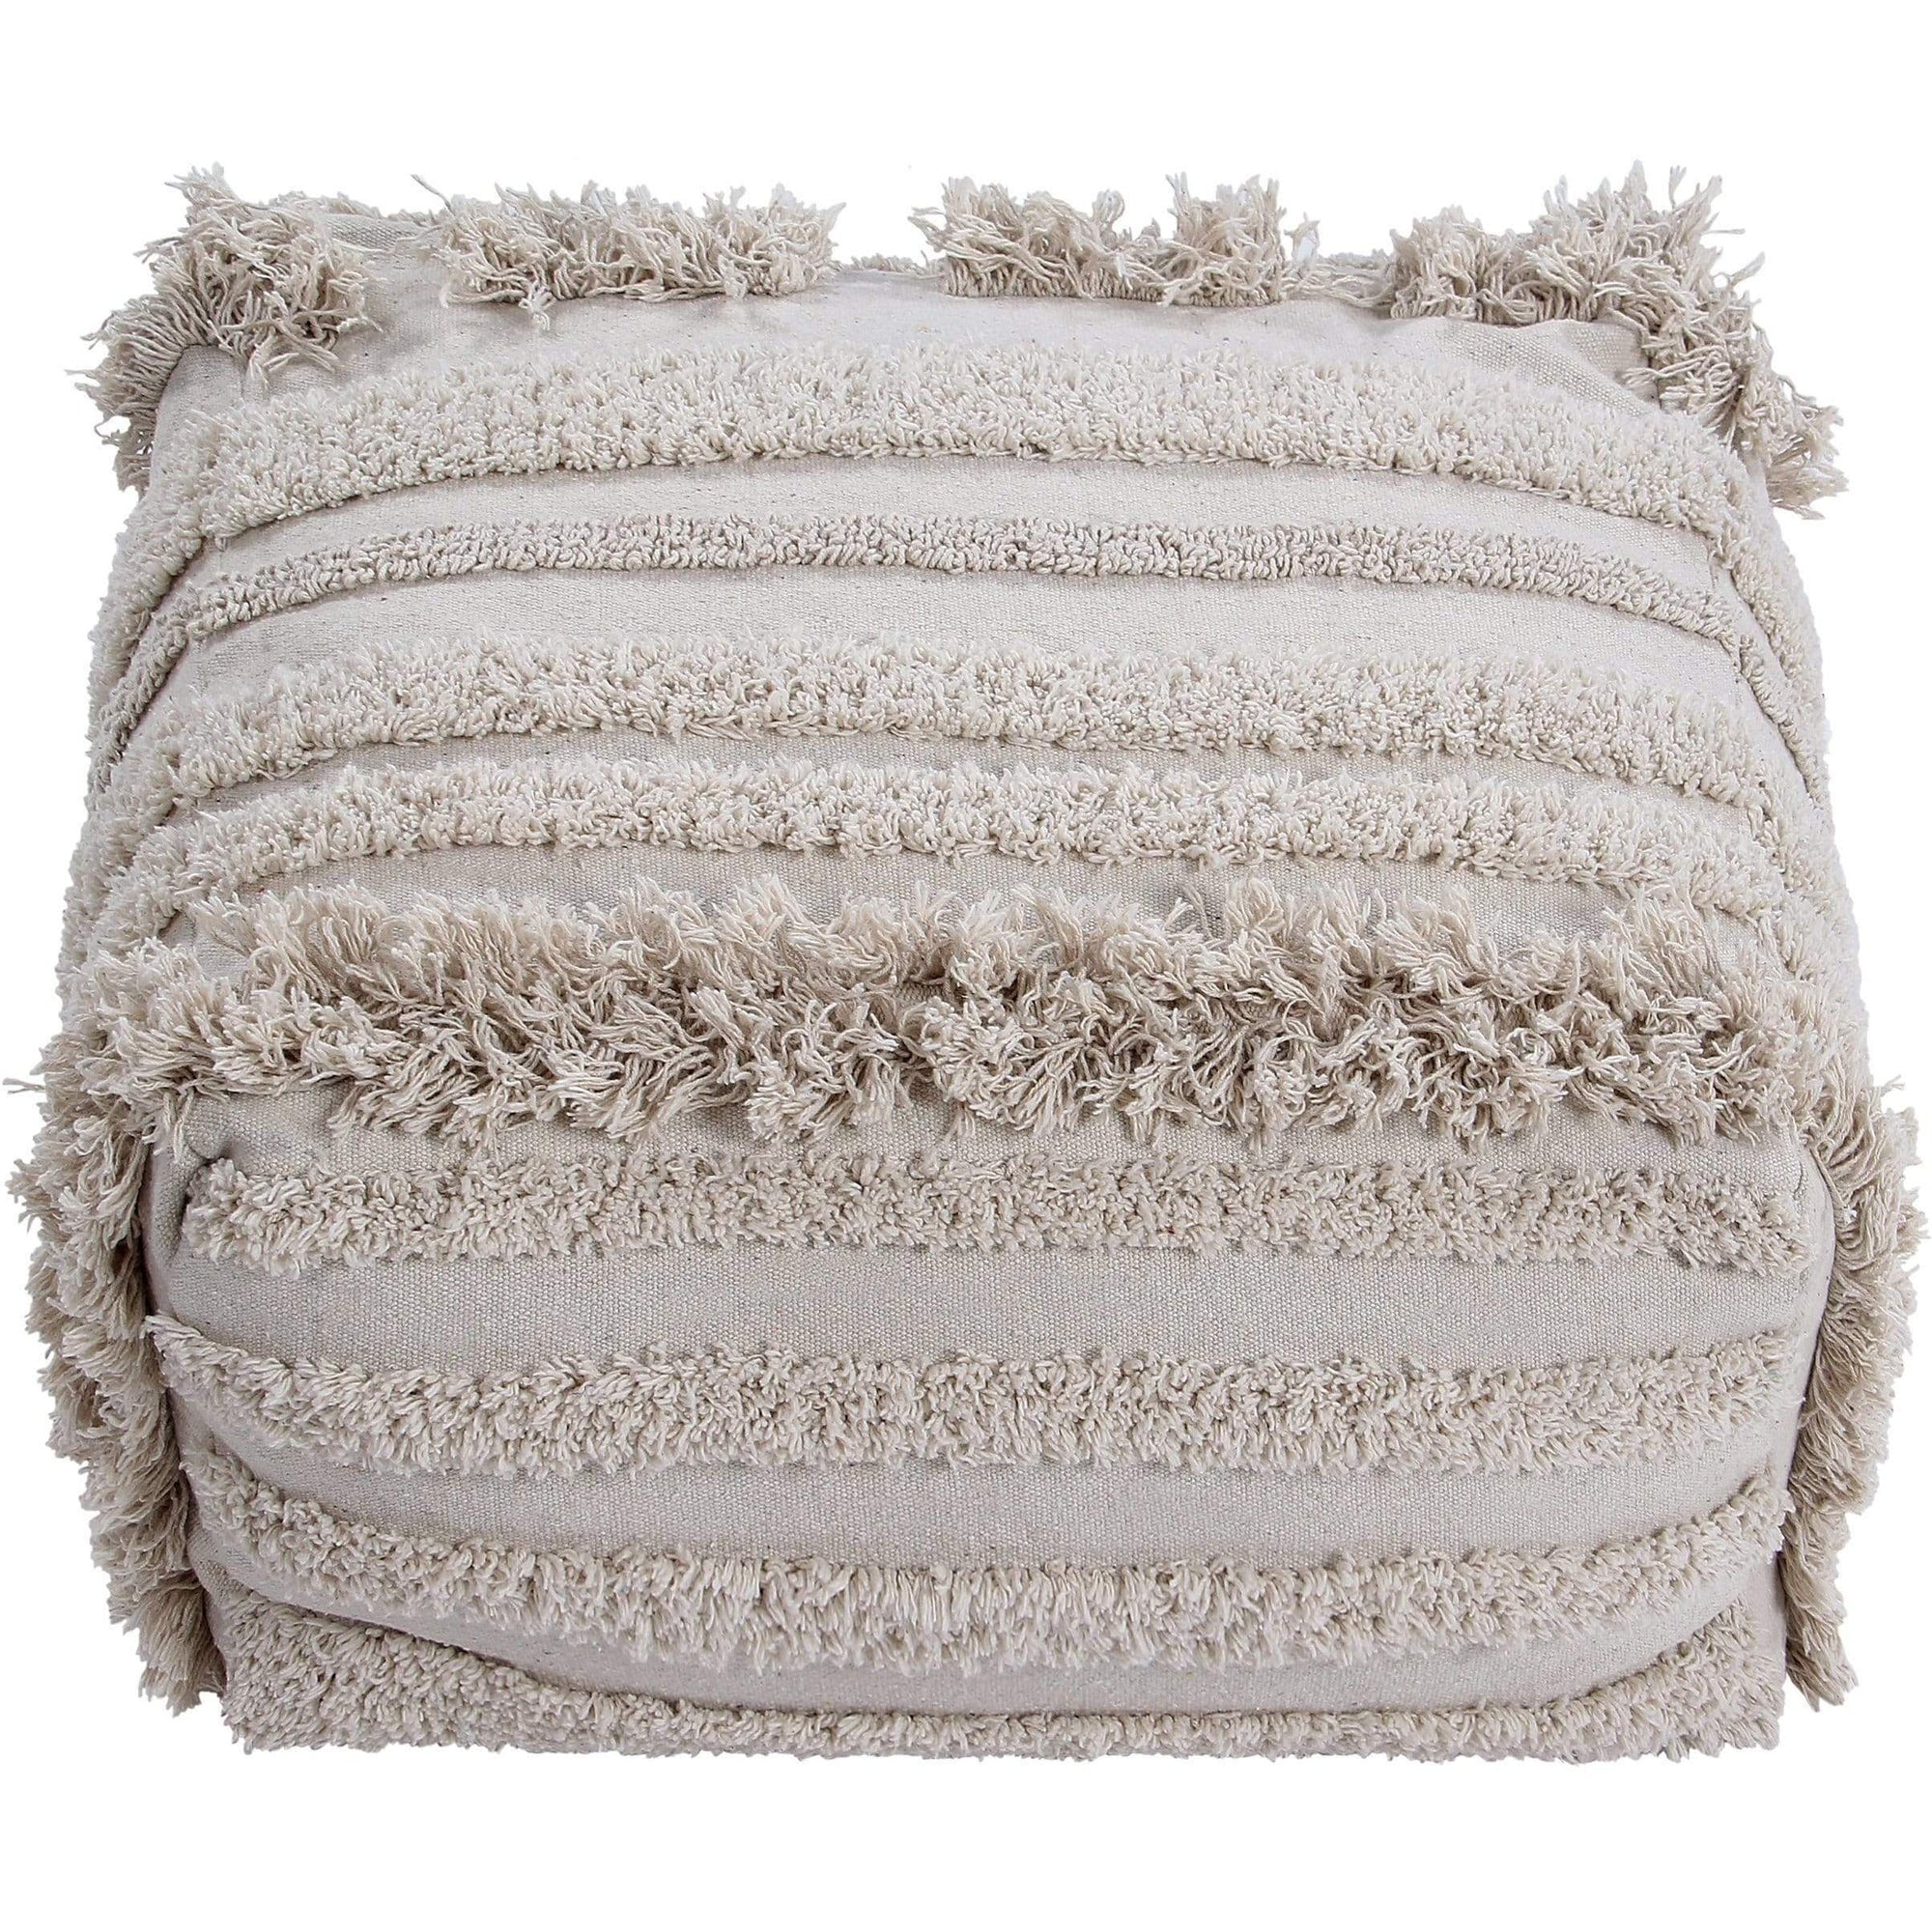 Rugs by Roo | Lorena Canals Early Hours Air Natural Pouffe-P-AIR-NAT